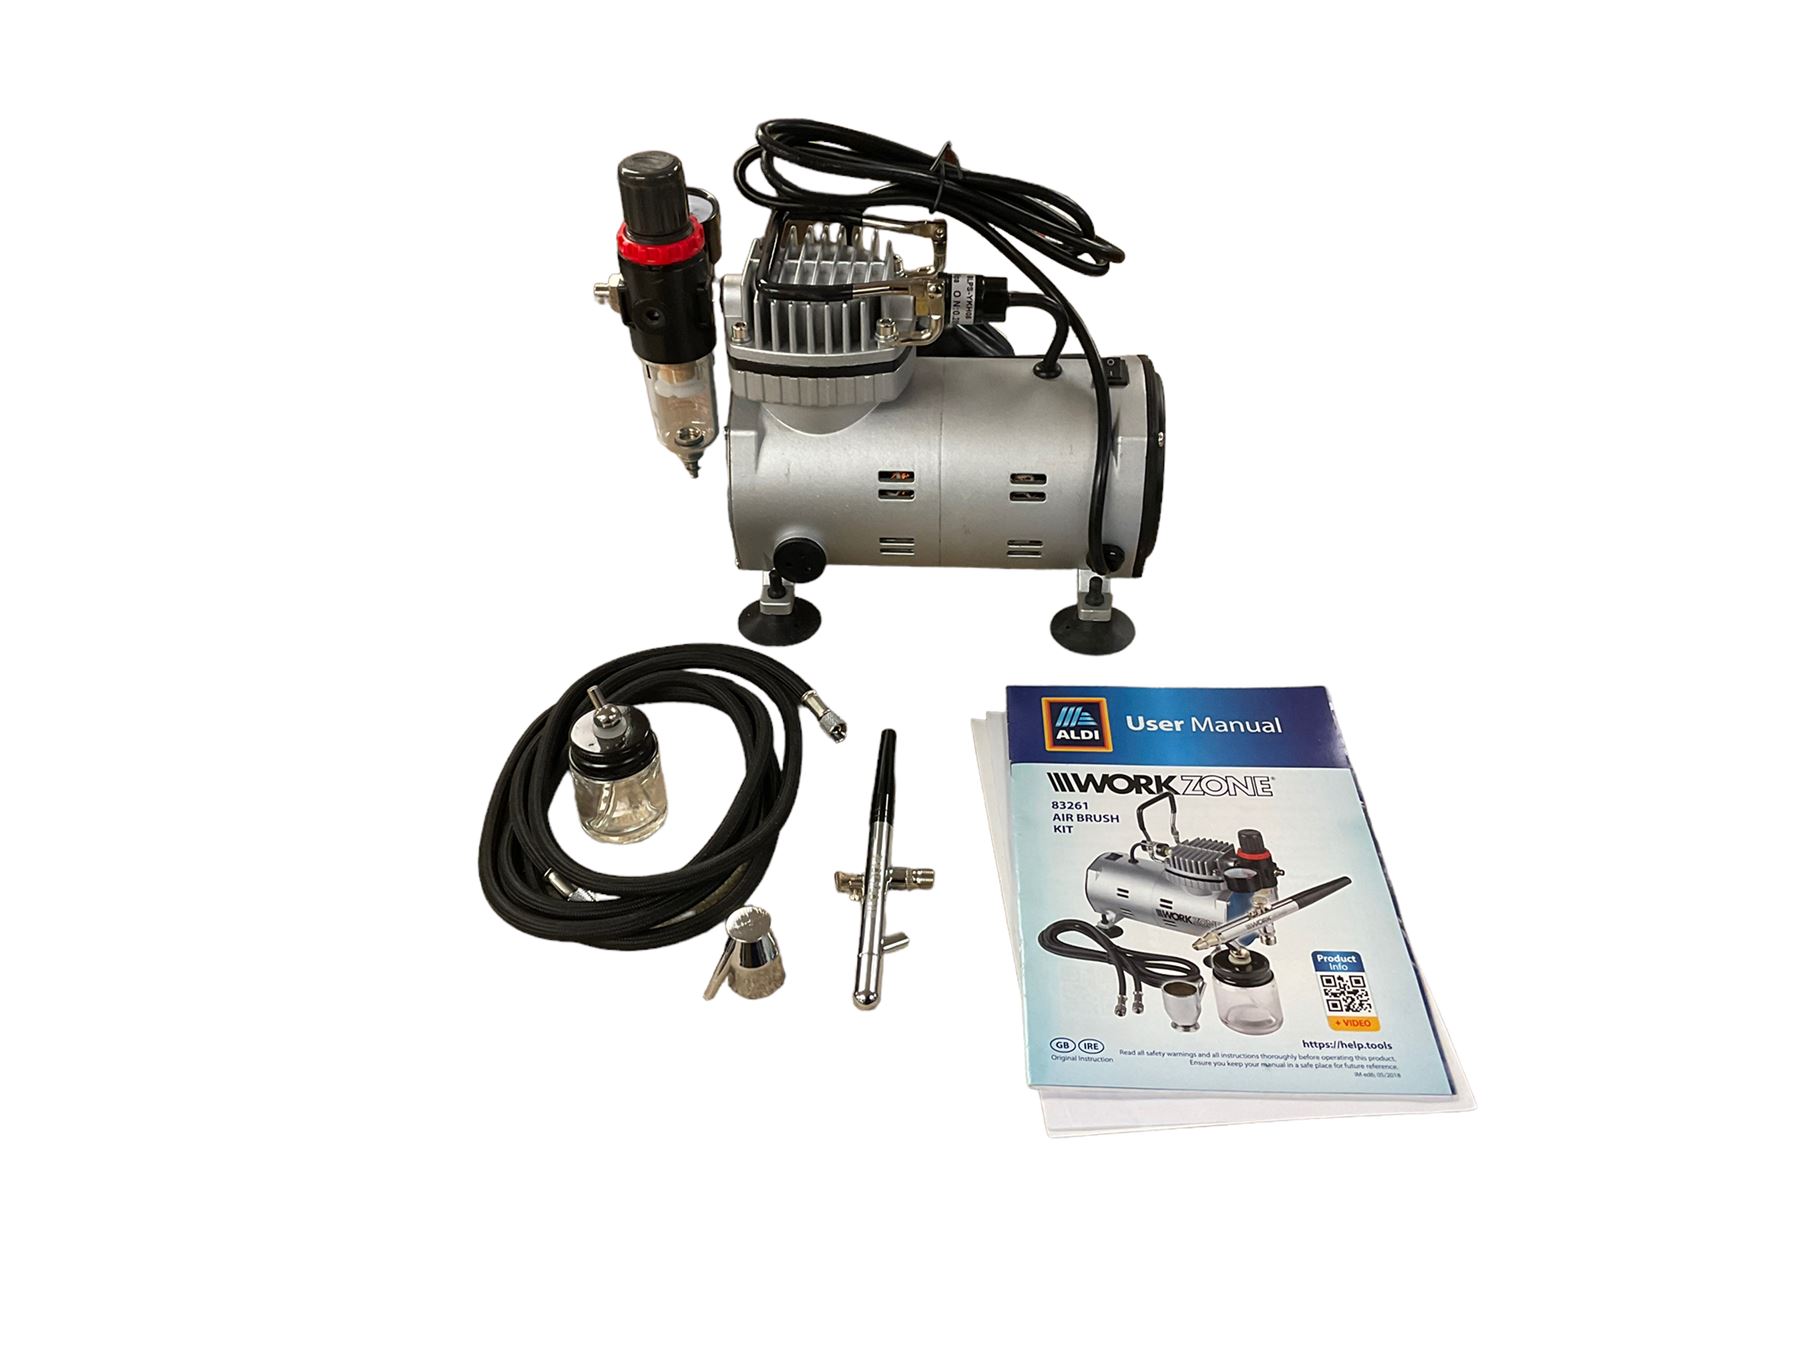 Workzone air compressor with attachments